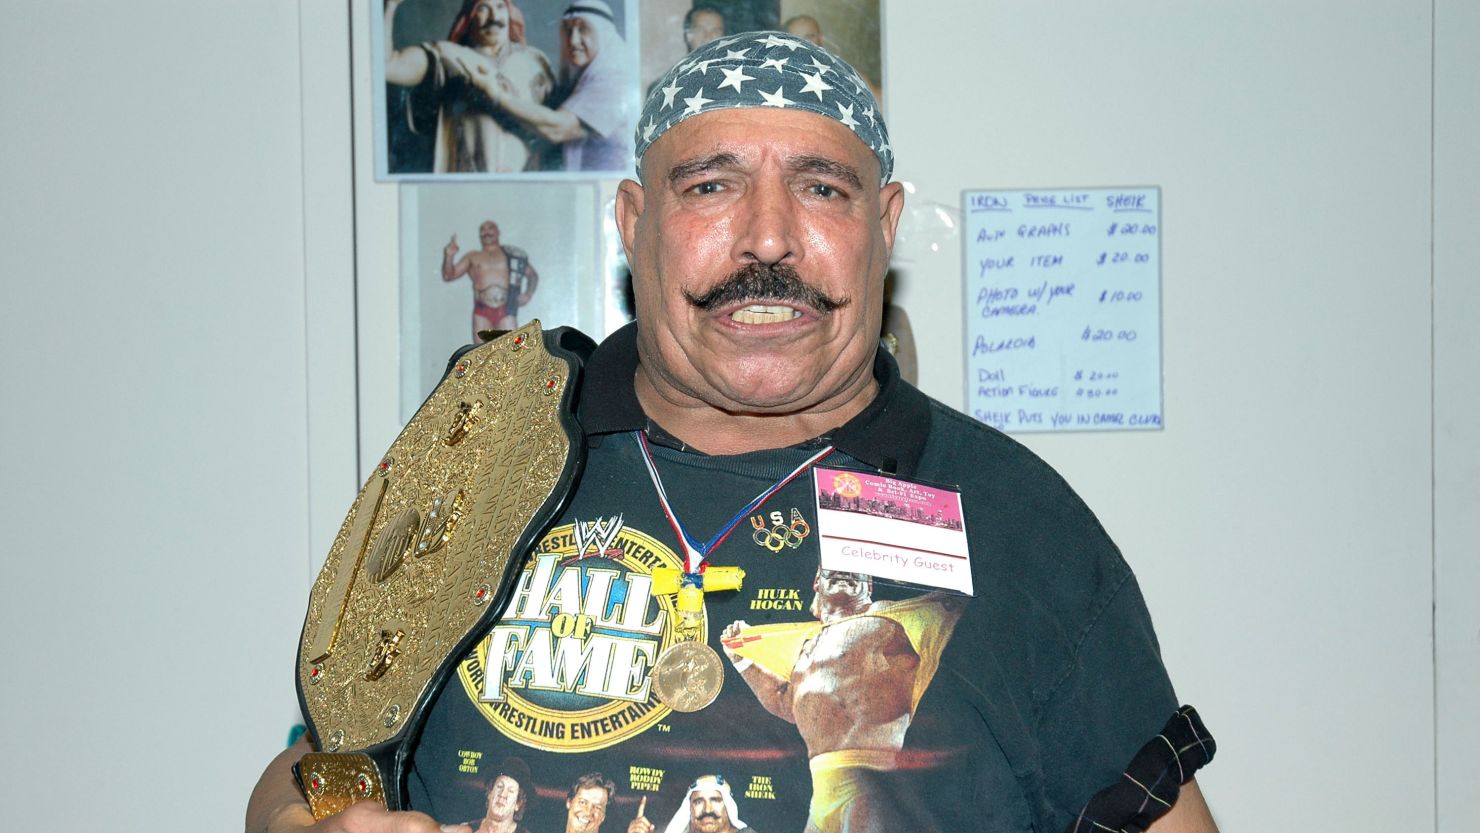 The Iron Sheik during Big Apple Con: Comic Book, Art, Toy and SciFi Expo on September 16, 2006 in New York.